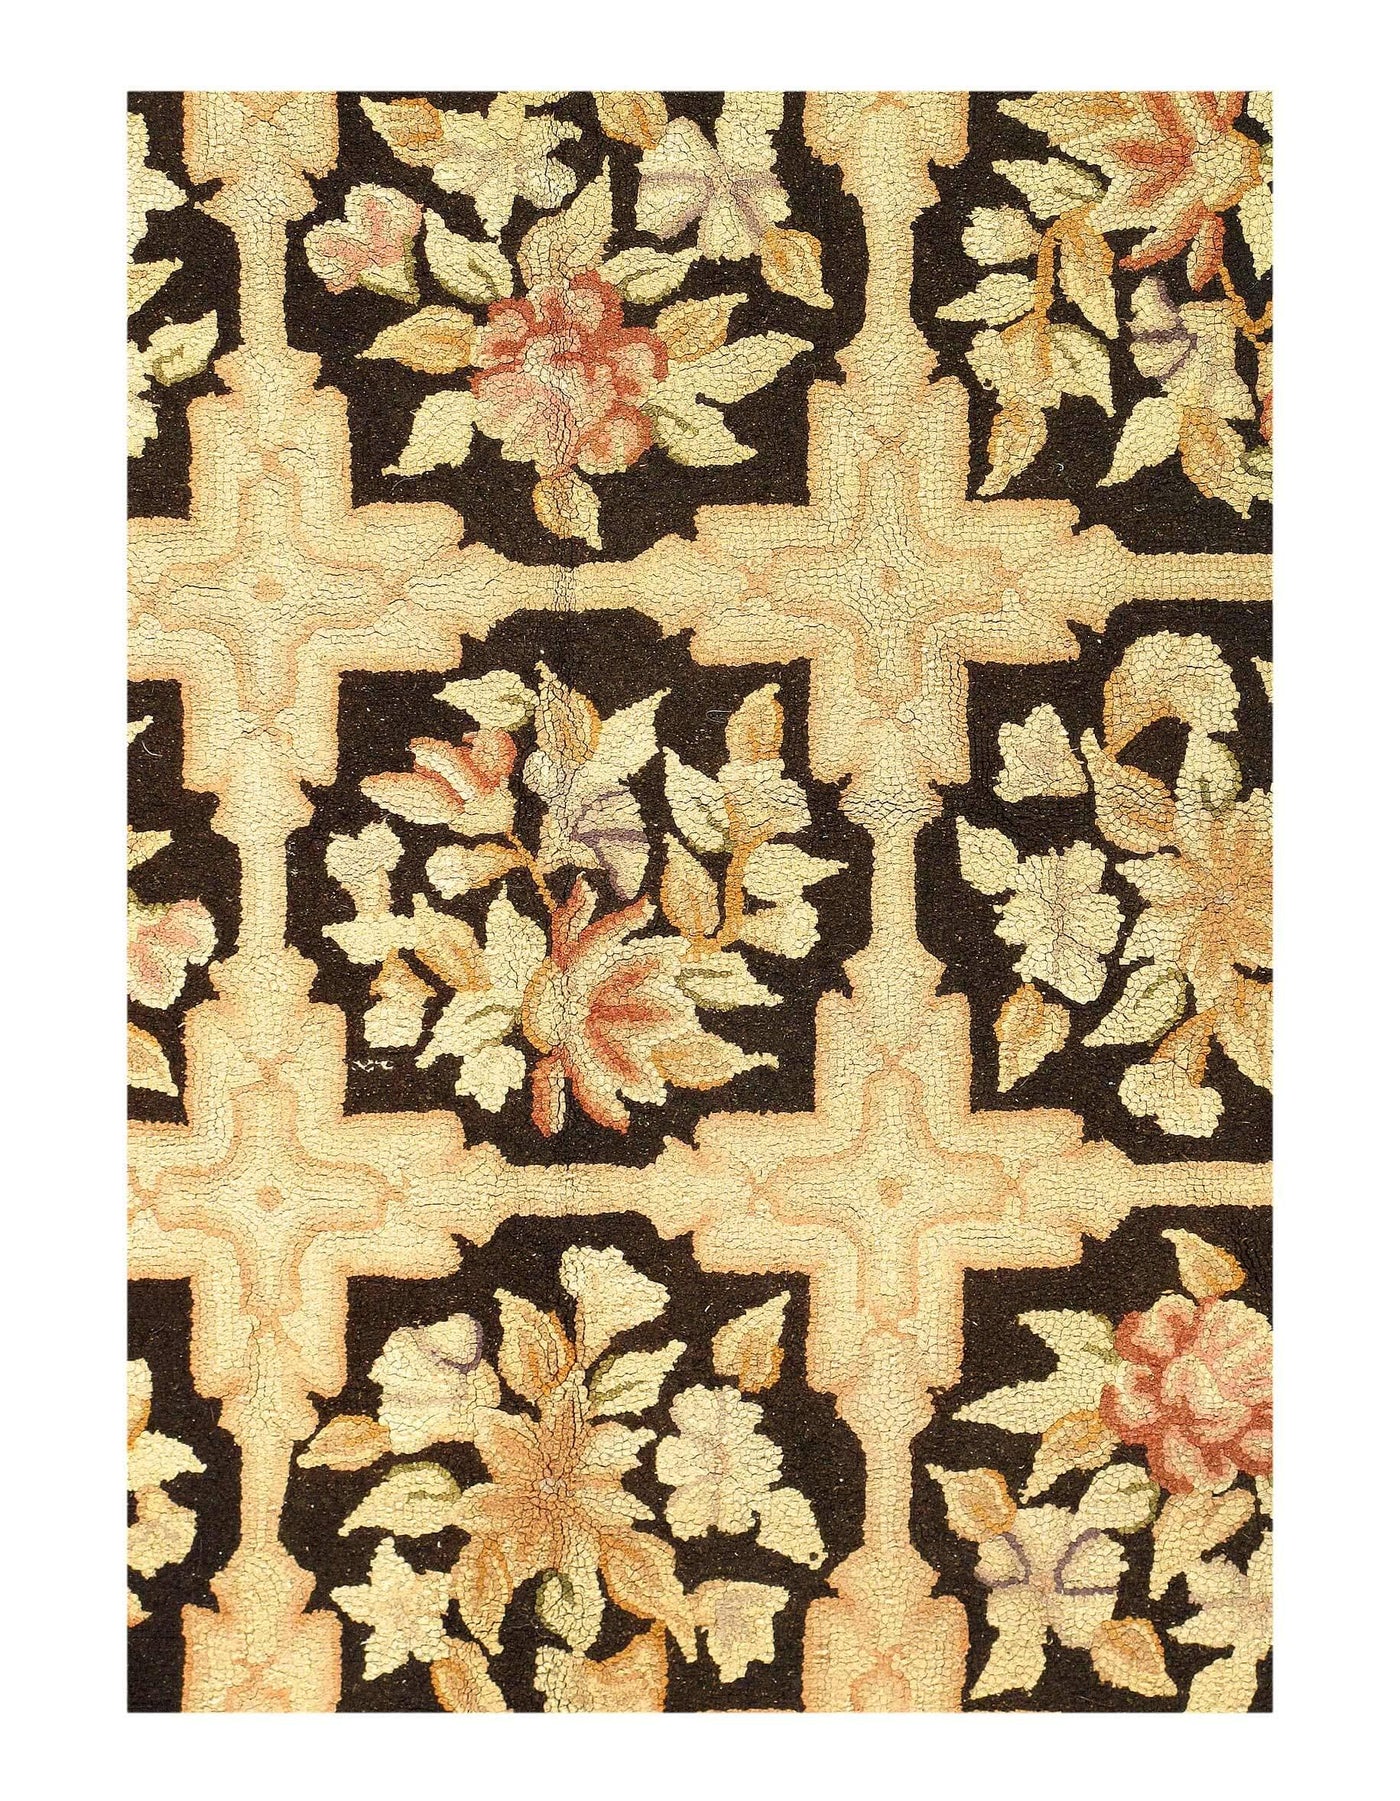 Canvello Antique American hooked rug - 3'8'' X 5'9''